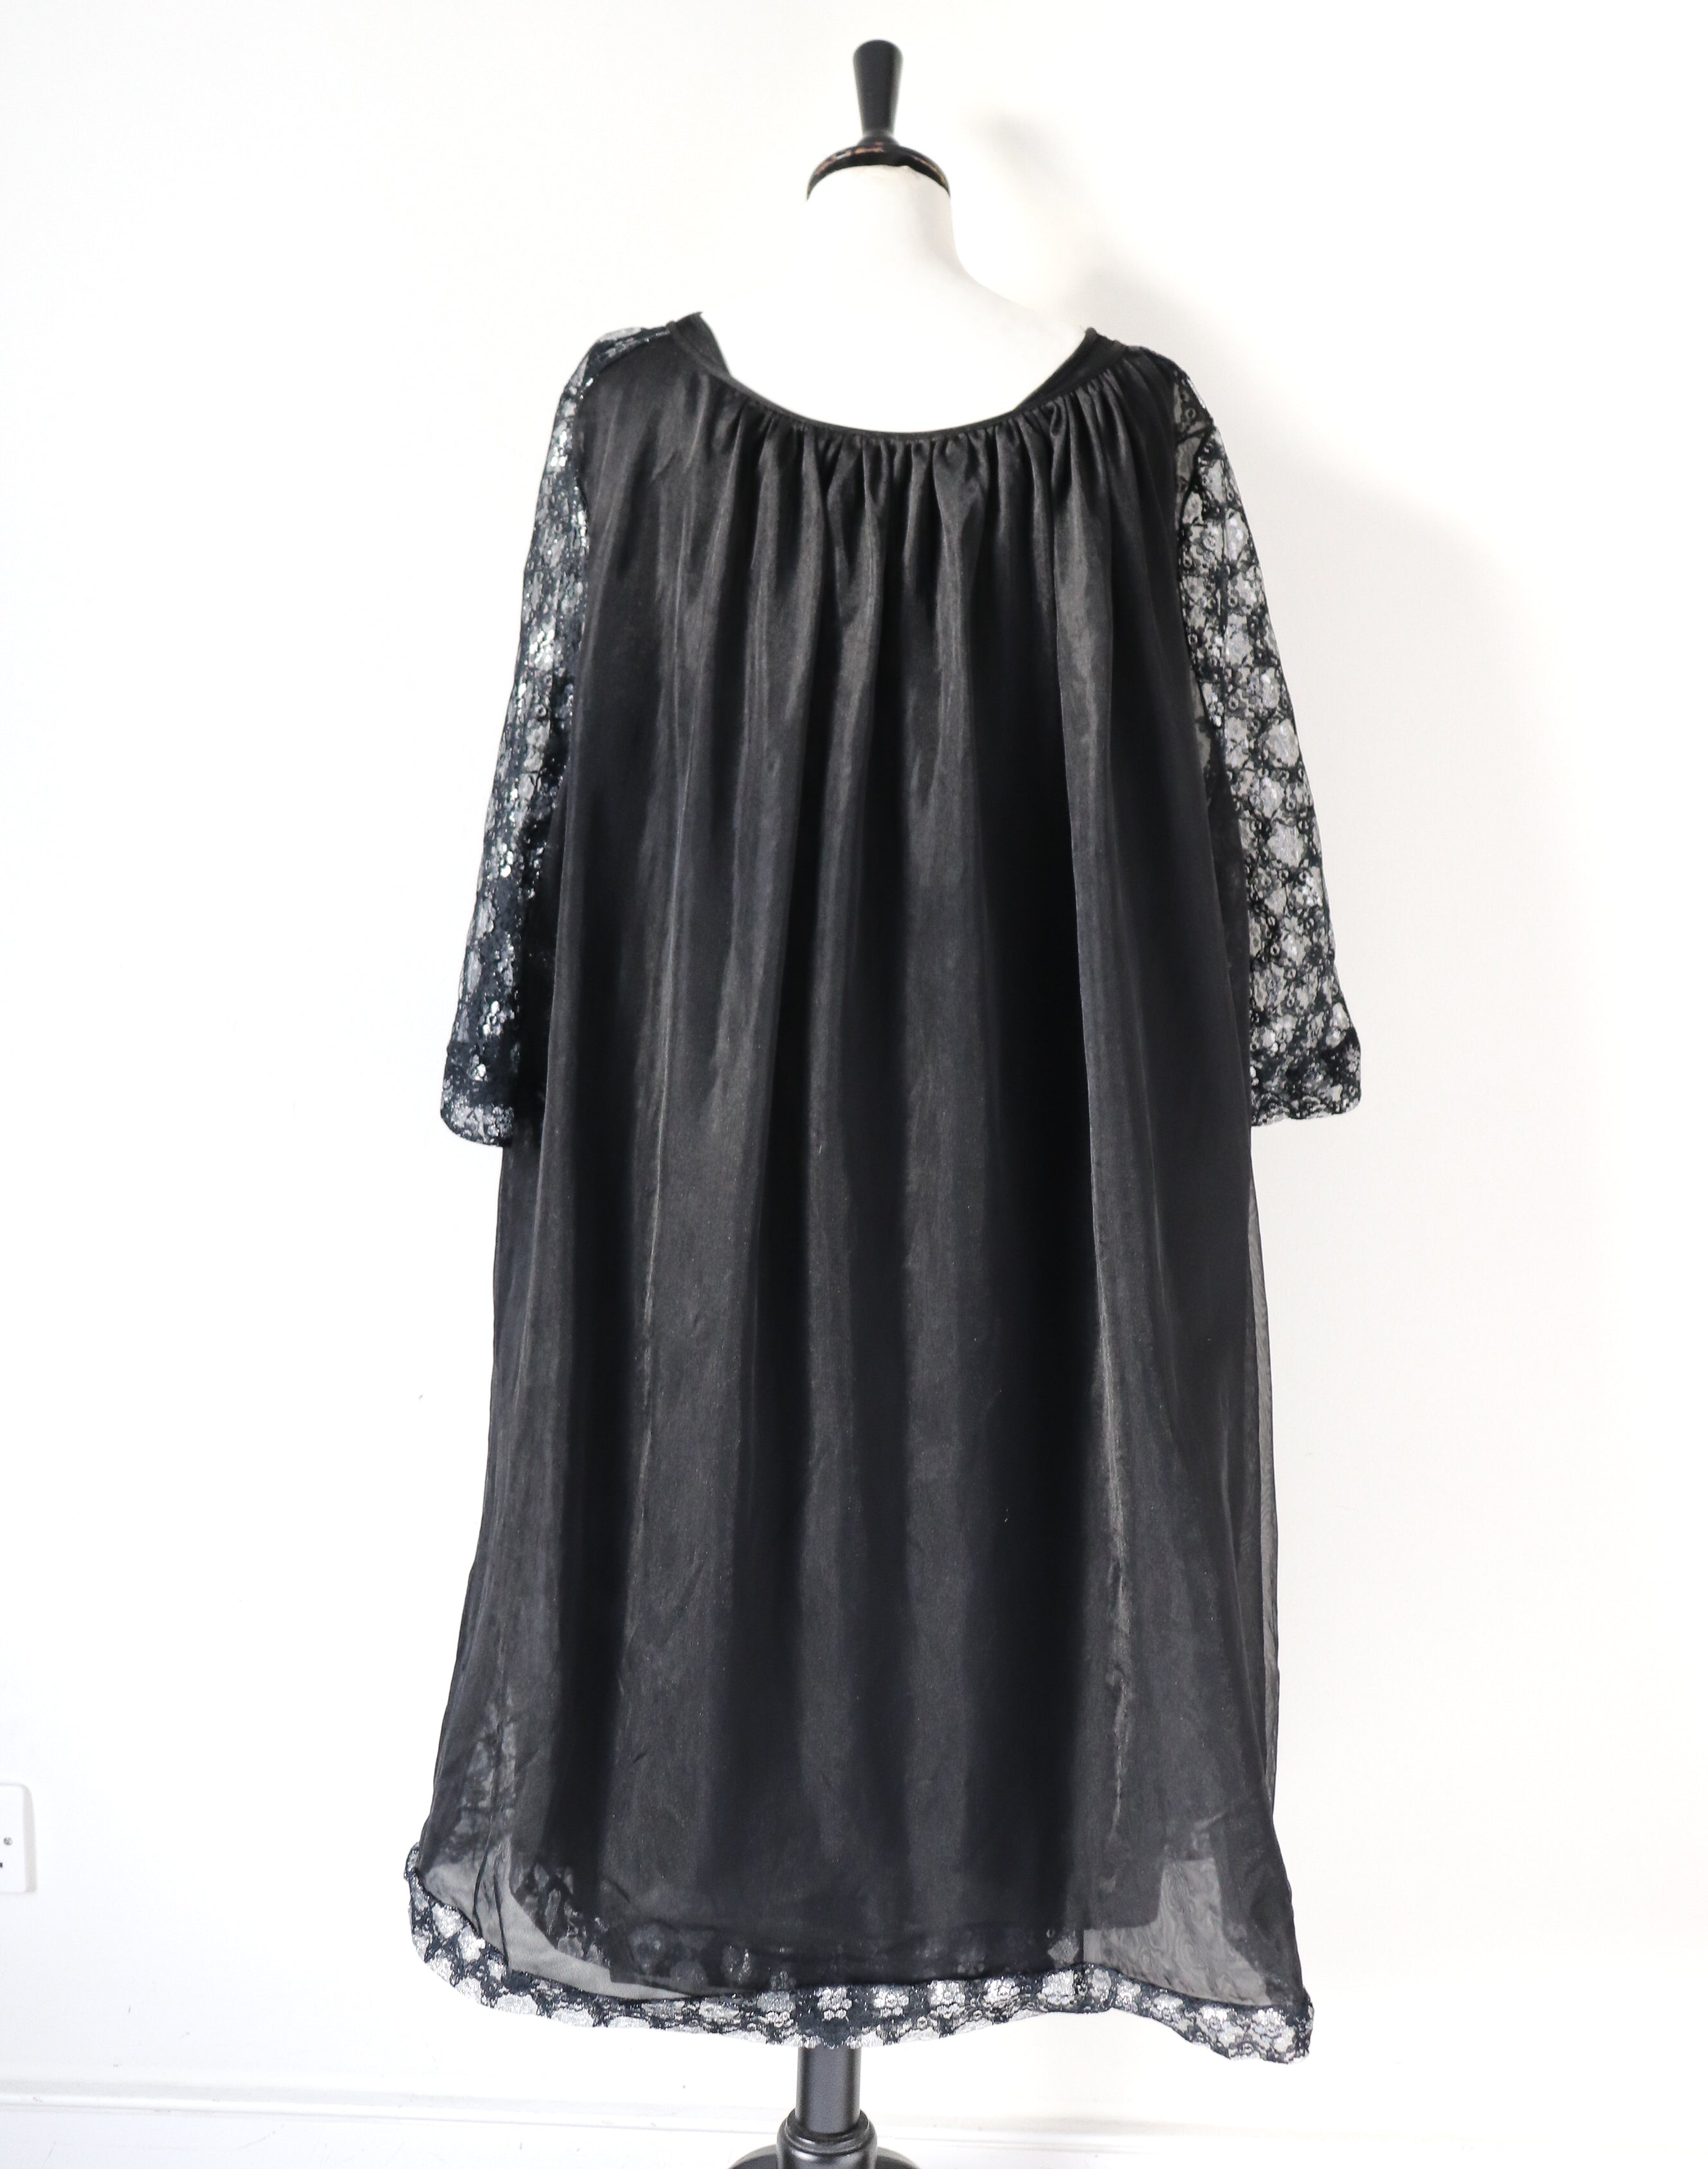 Black / Silver Vintage Evening Gown - 2 Piece 1960s Dress / Coat Negligee